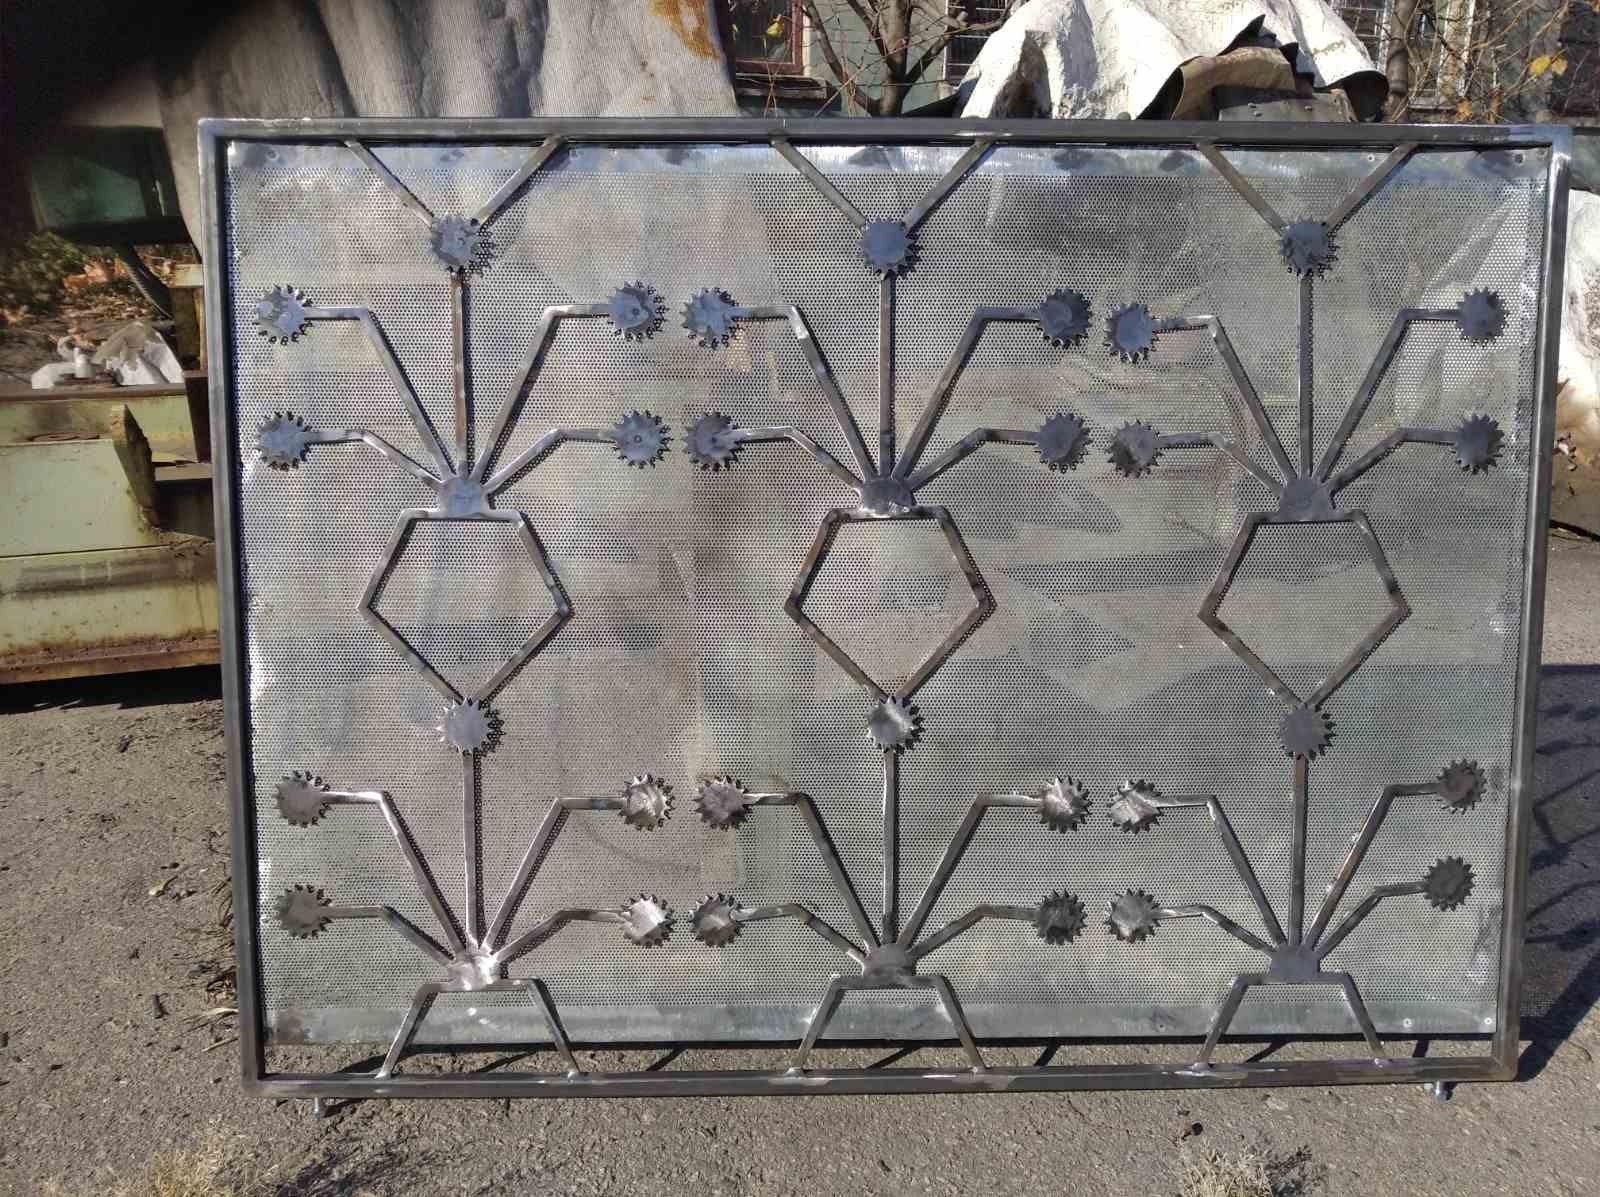 Fireplace screen, Christmas gift, iron gift, fireplace, anniversary, birthday, father, wow gift, design,blacksmith,hand hammered,hand forged